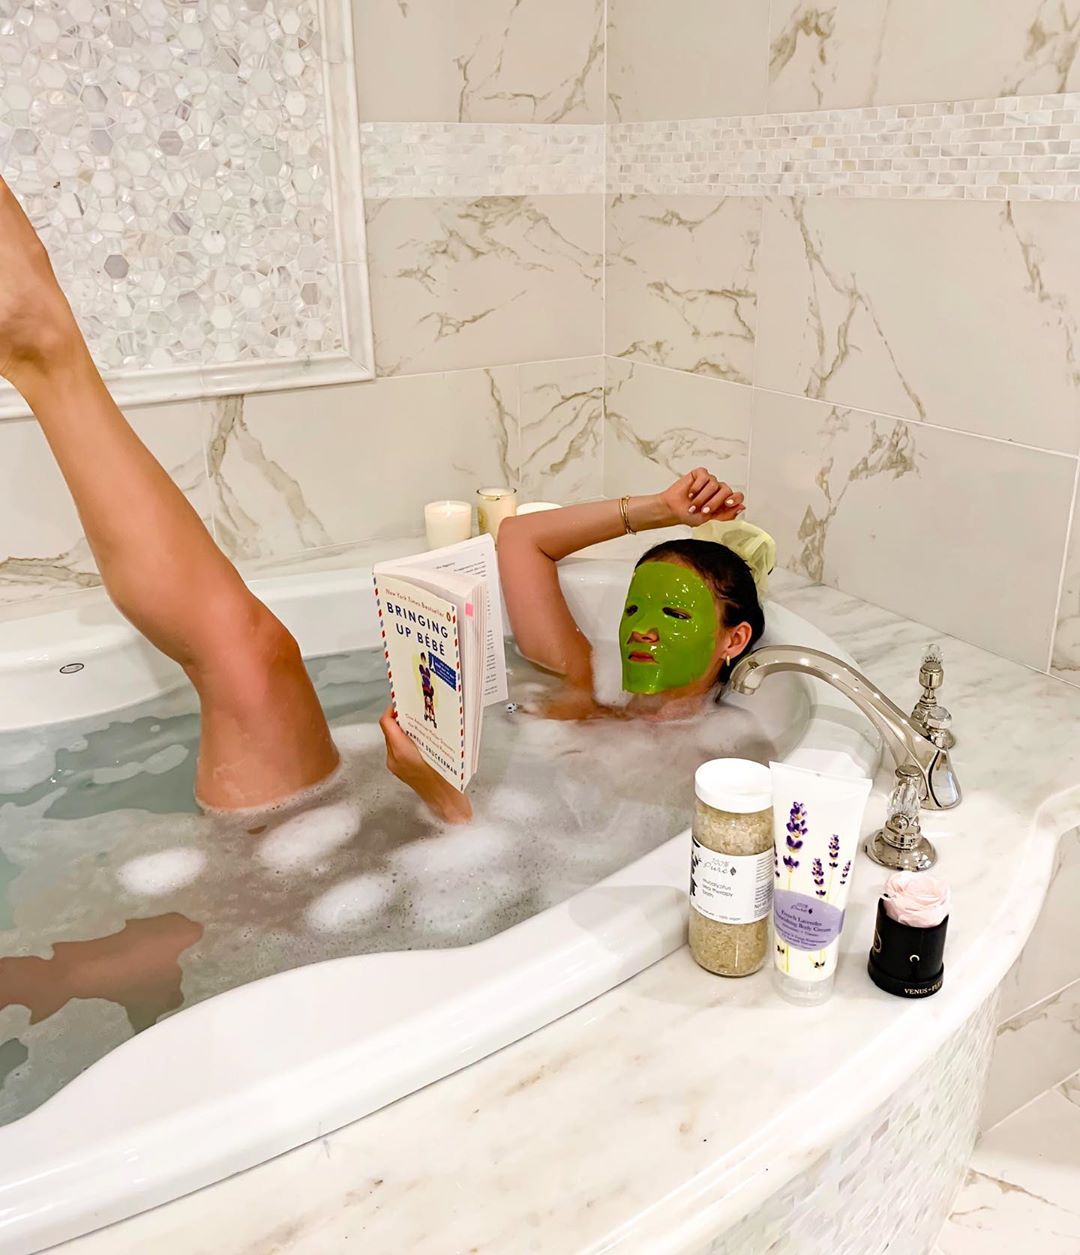 100% PURE - Is anyone else doing some midweek R&R? Grab our Self-Care Spa Kit for the complete #cleanskincare zen getaway. 🌿💧✨⁣
⁣
Eucalyptus Sea Therapy Bath⁣
Green Tea Water Bomb Mask⁣
French Lavende...